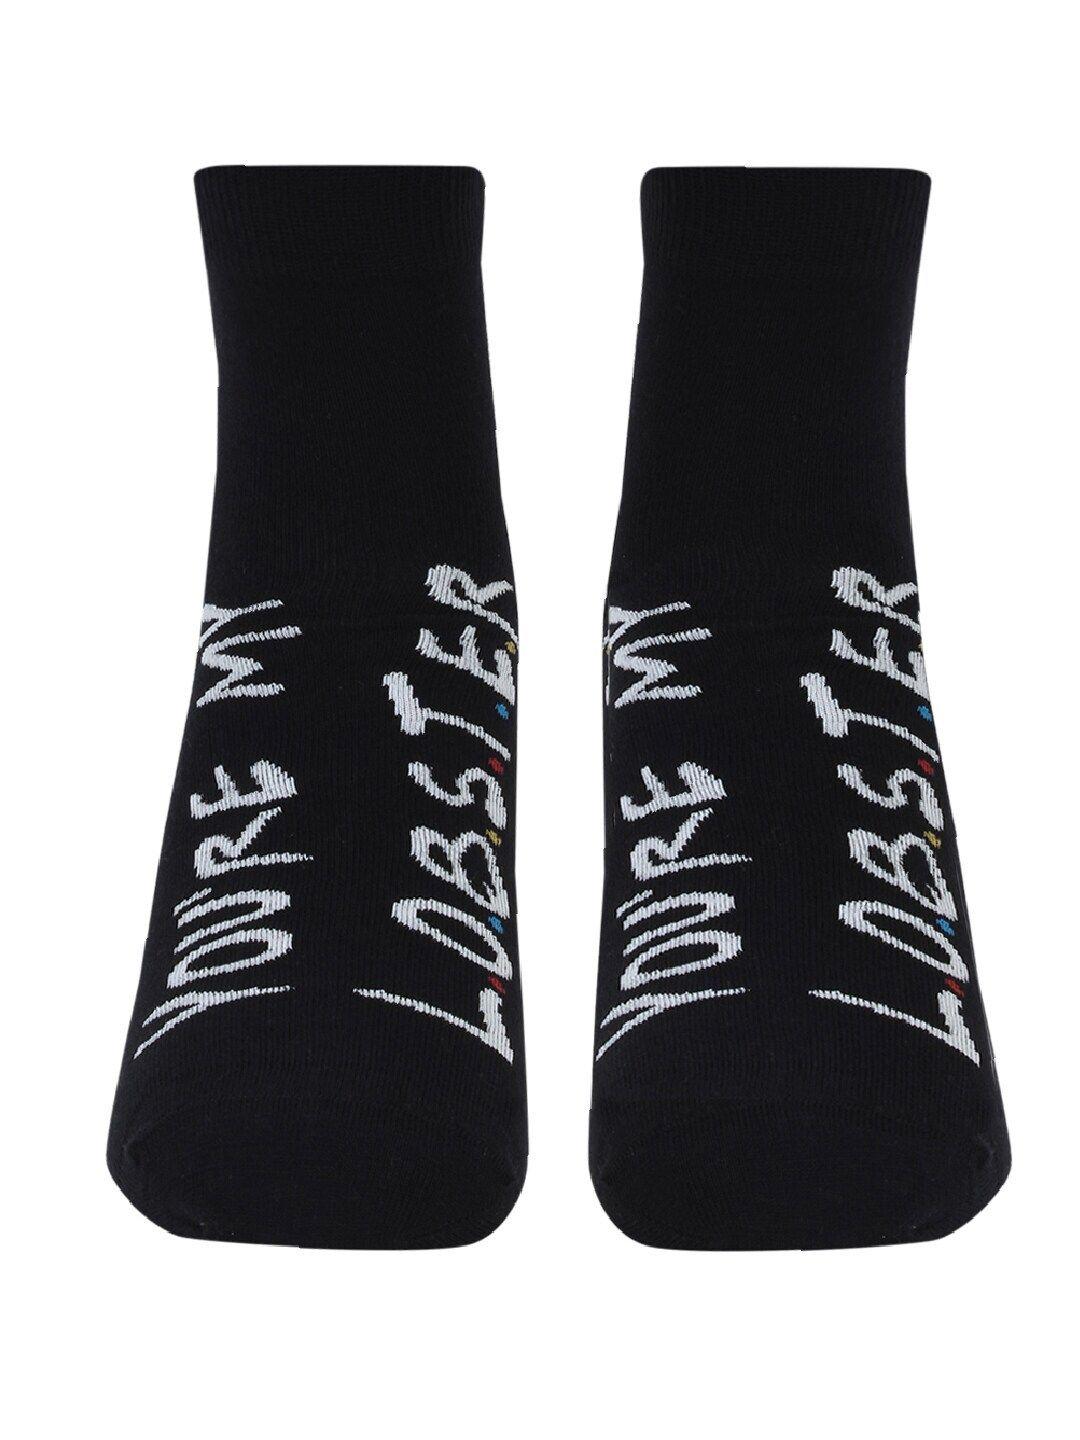 soxytoes unisex black & white patterned pure combed cotton ankle length socks